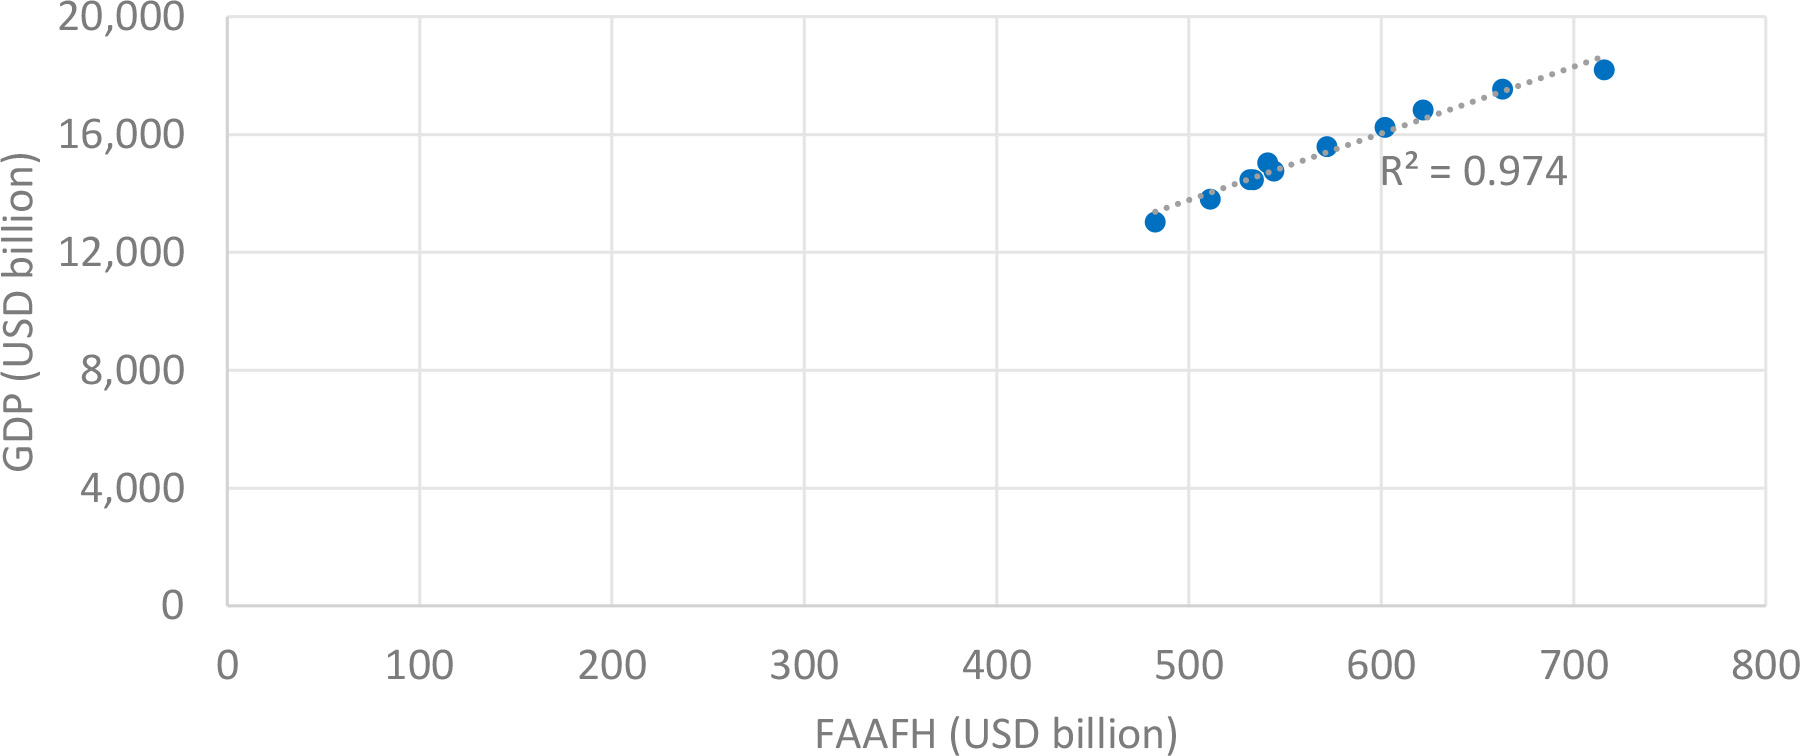 FAAFH compared to GDP for the USA (2005–2015). Source: Author’s own elaboration.